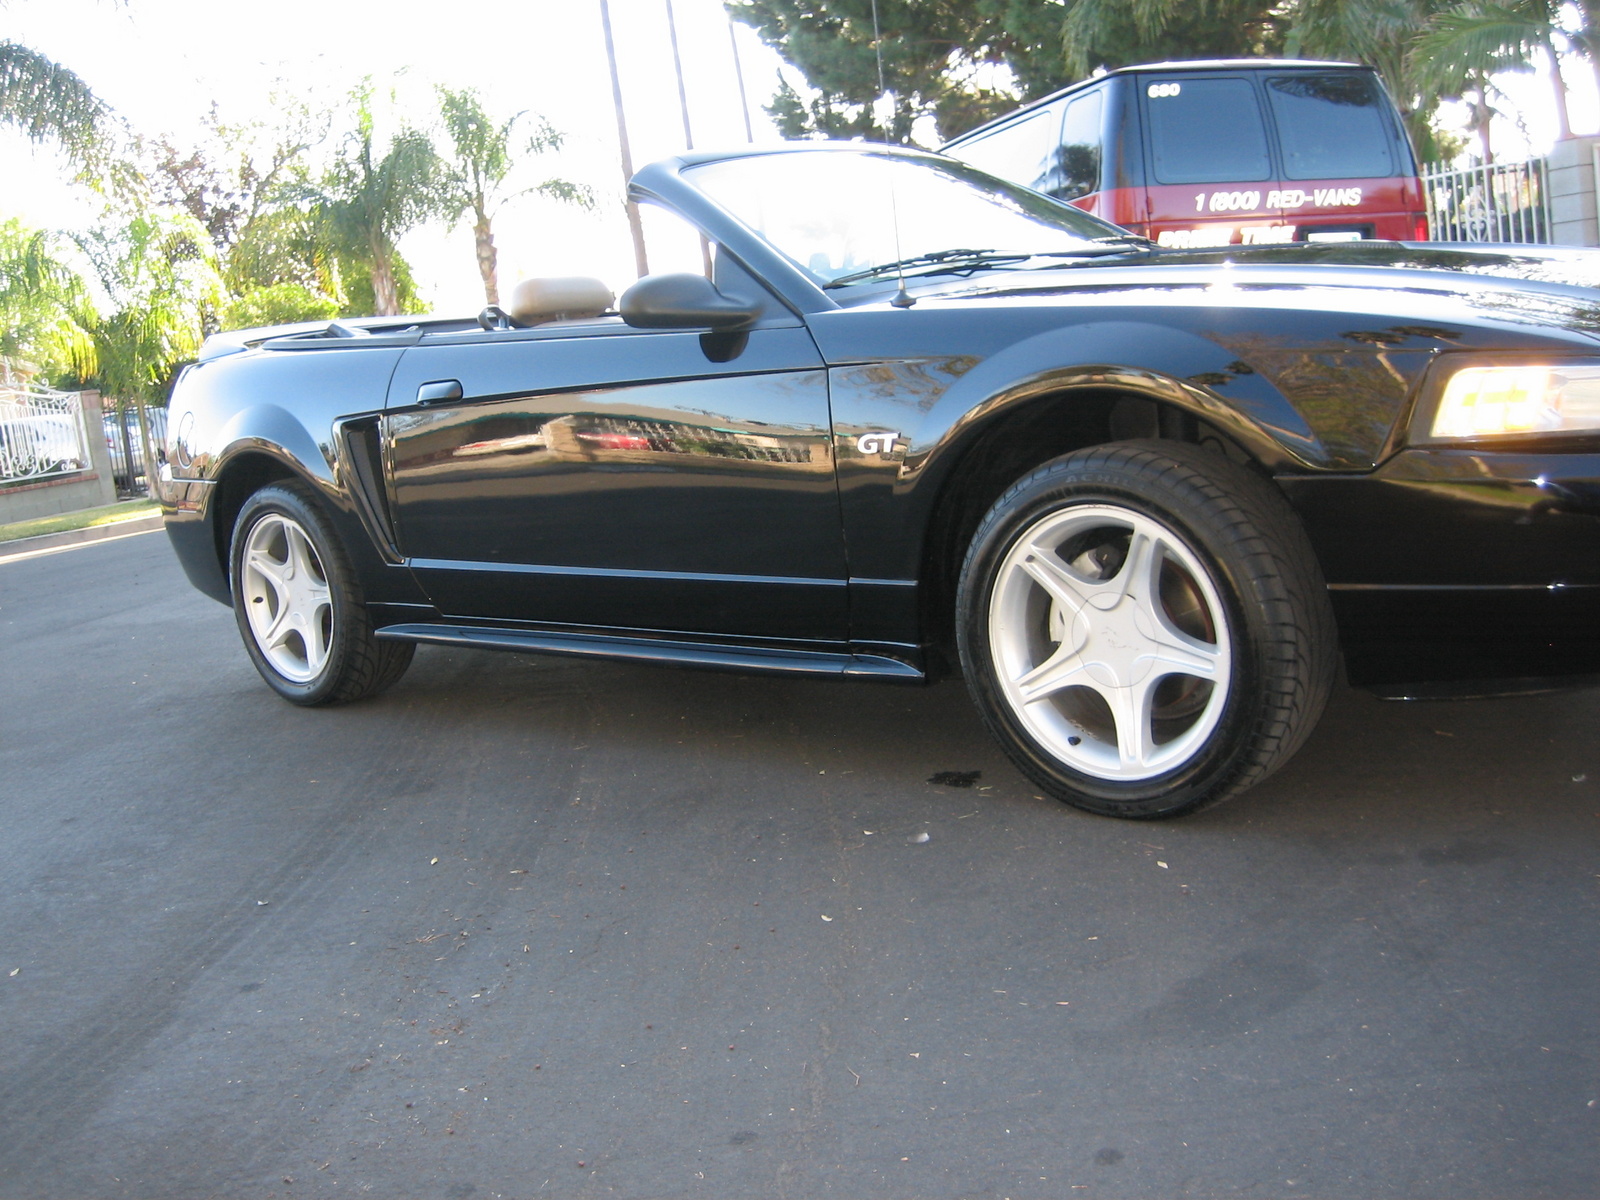 2000 Ford mustang gt convertible specs #4